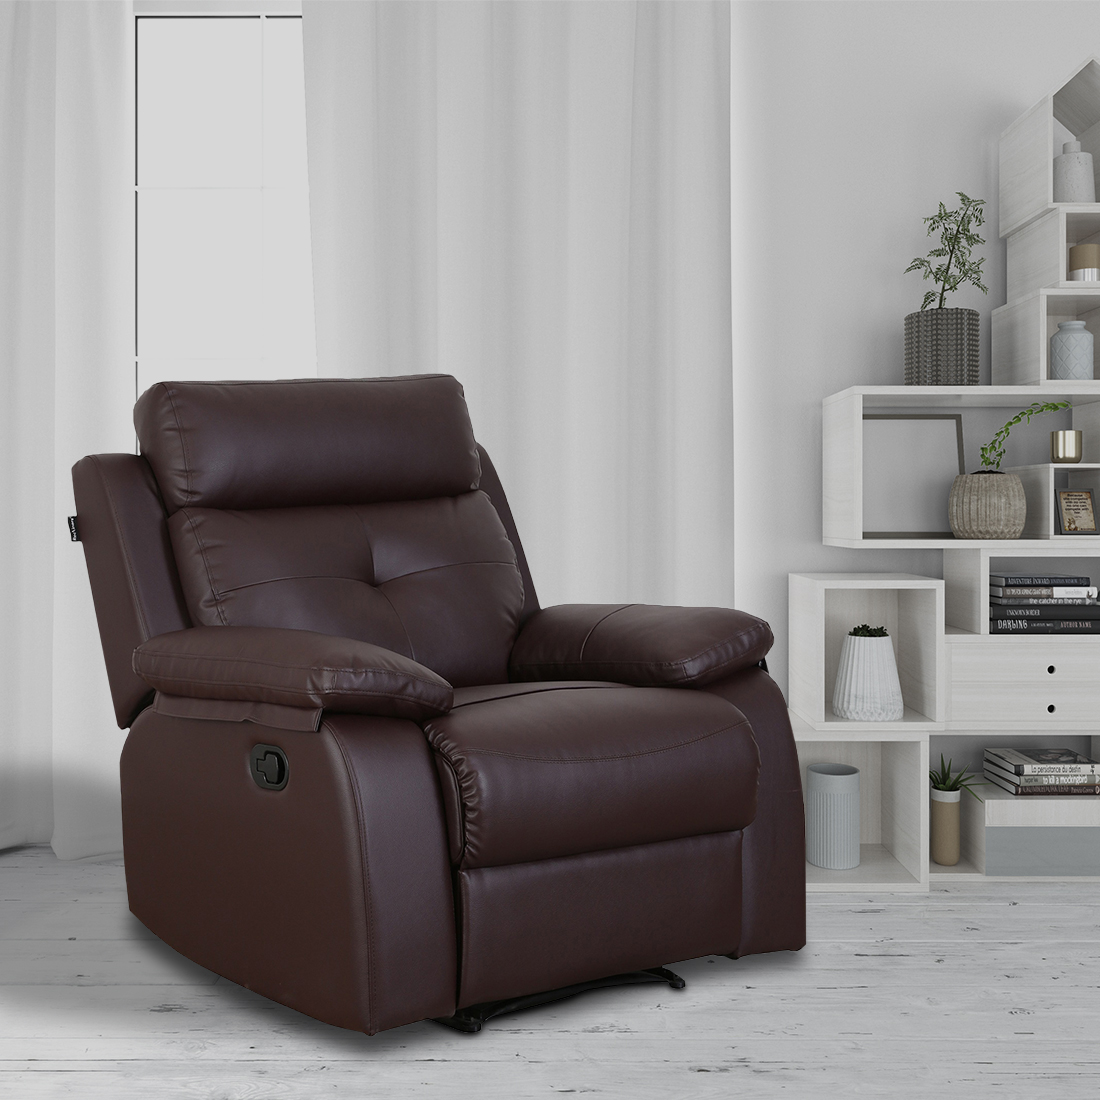 Single Seater Brown Recliner Chair - Ohio